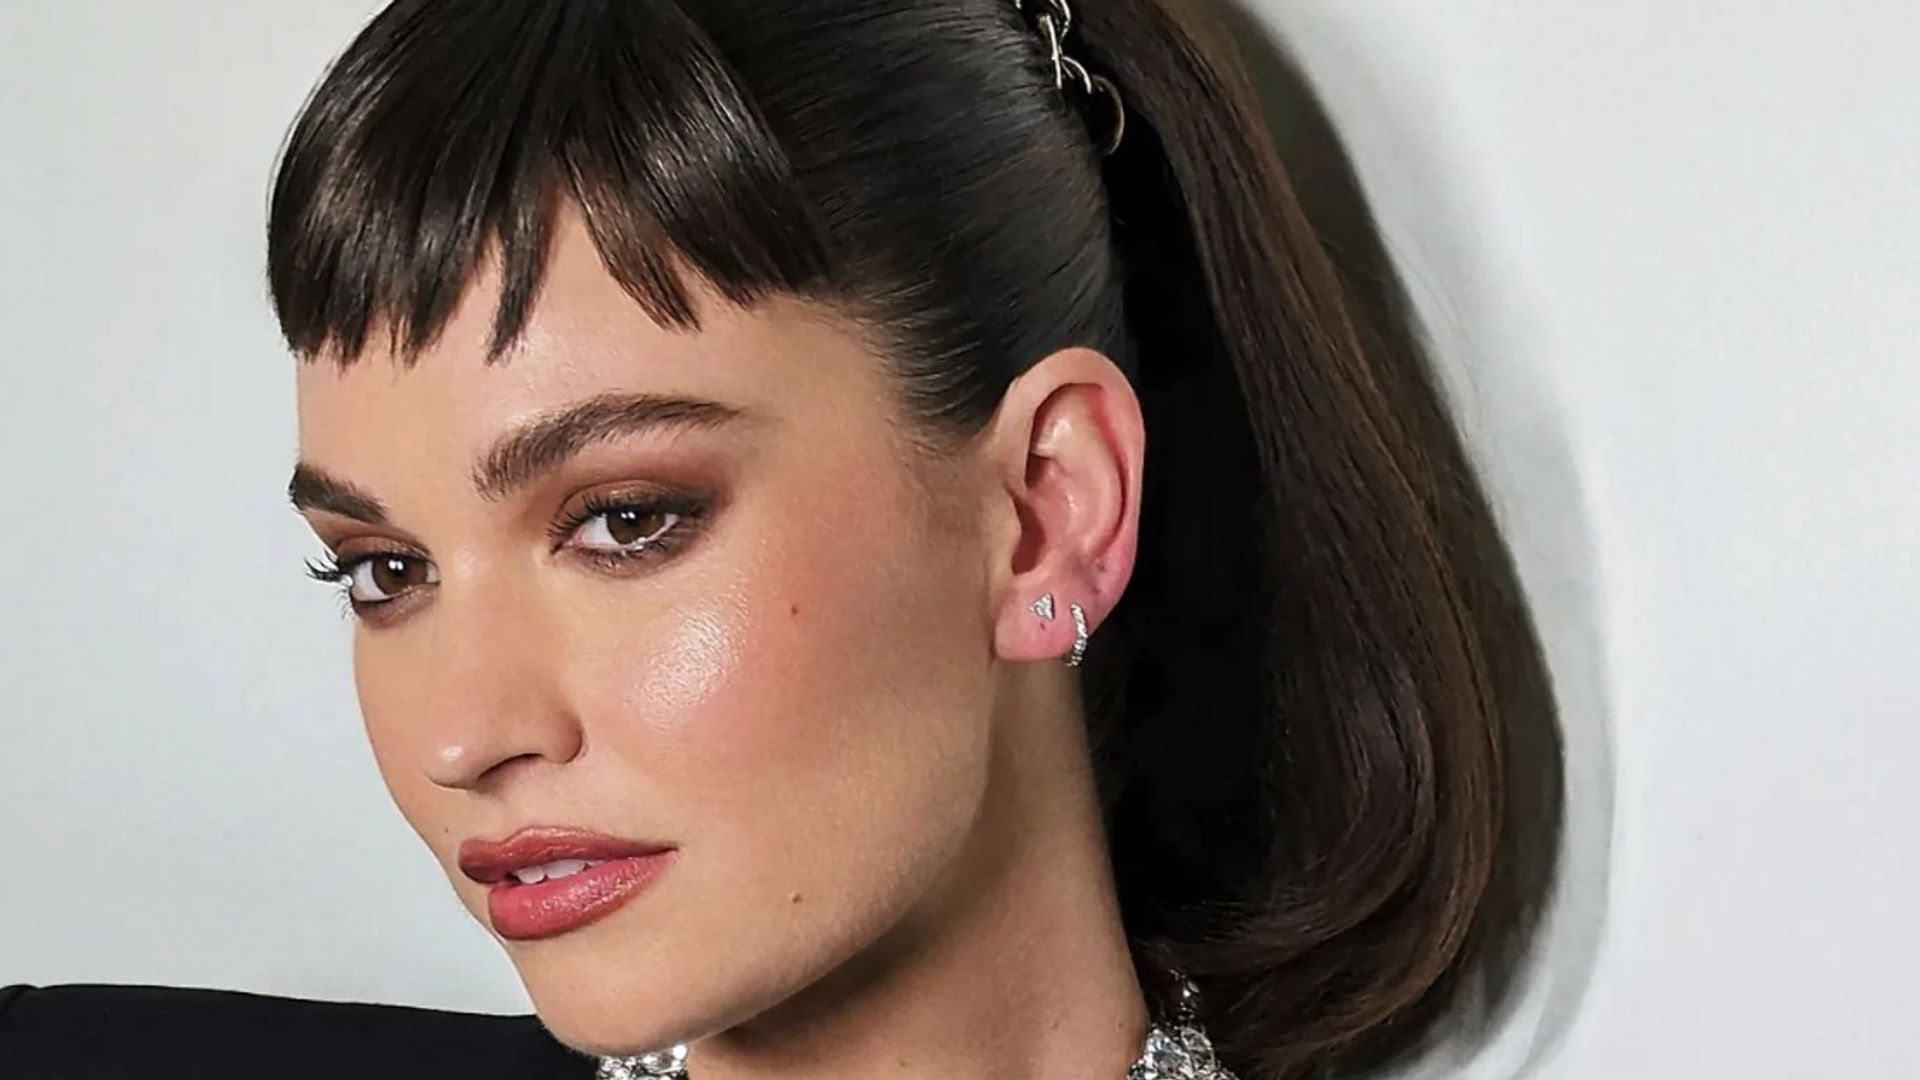 Lily James poses with micro bangs and a diamond necklace at the Met Gala 2023 after party